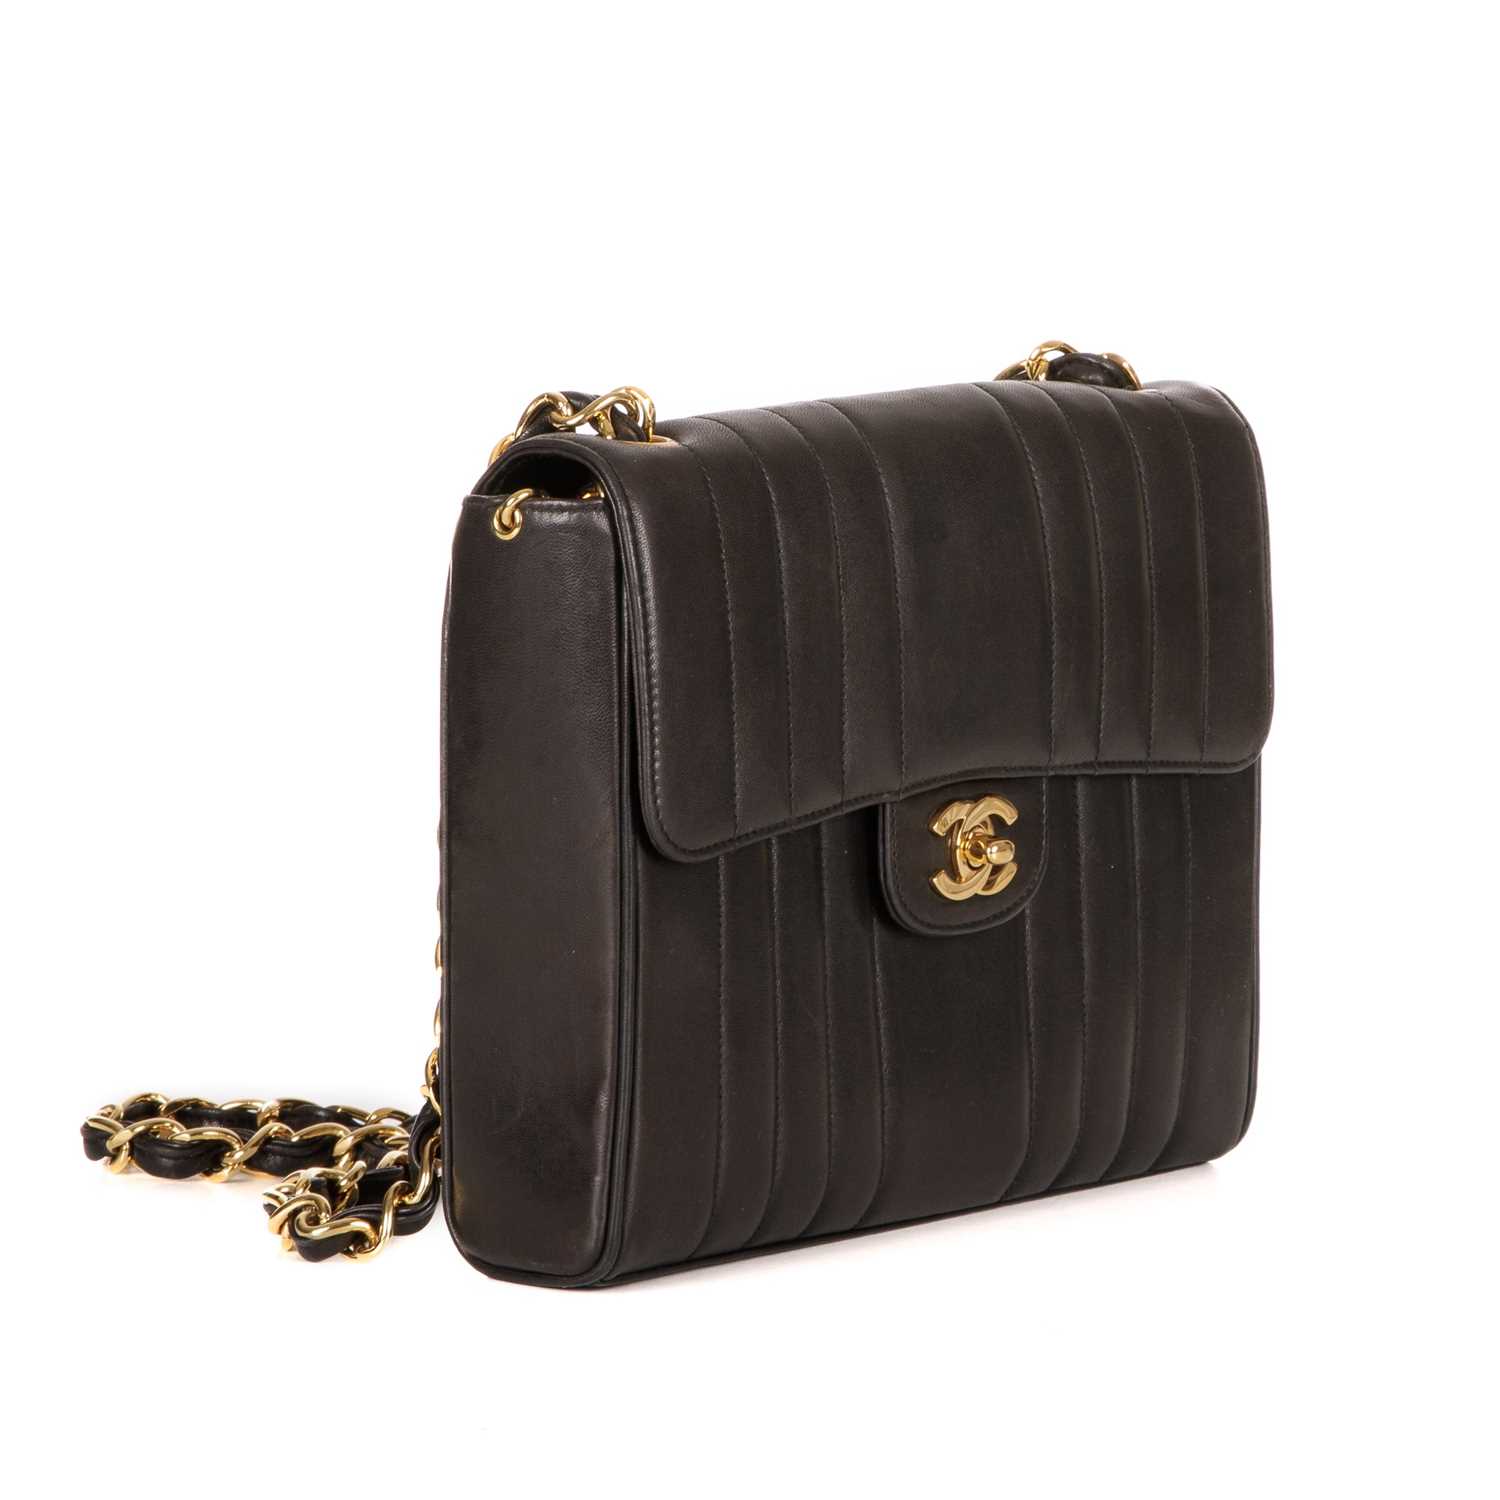 Chanel, a vintage vertical Classic Flap handbag, crafted from black lambskin leather, with - Image 3 of 5